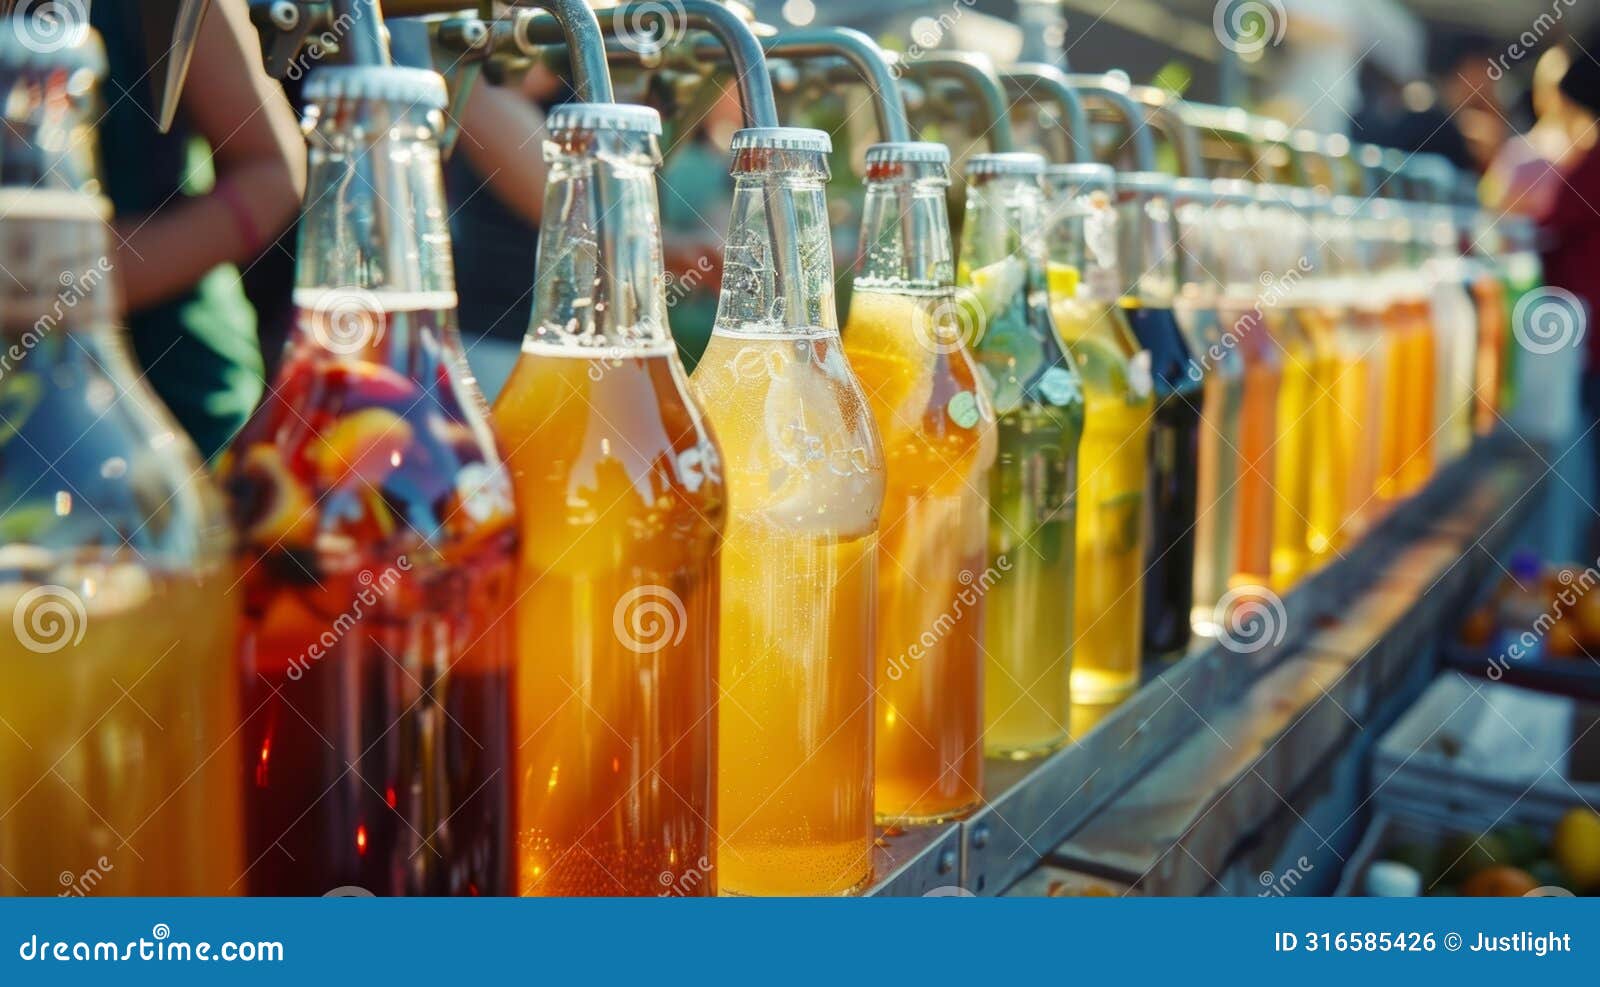 a vendor sells nonalcoholic beer offering a variety of flavors including fruity and traditional options to cater to all